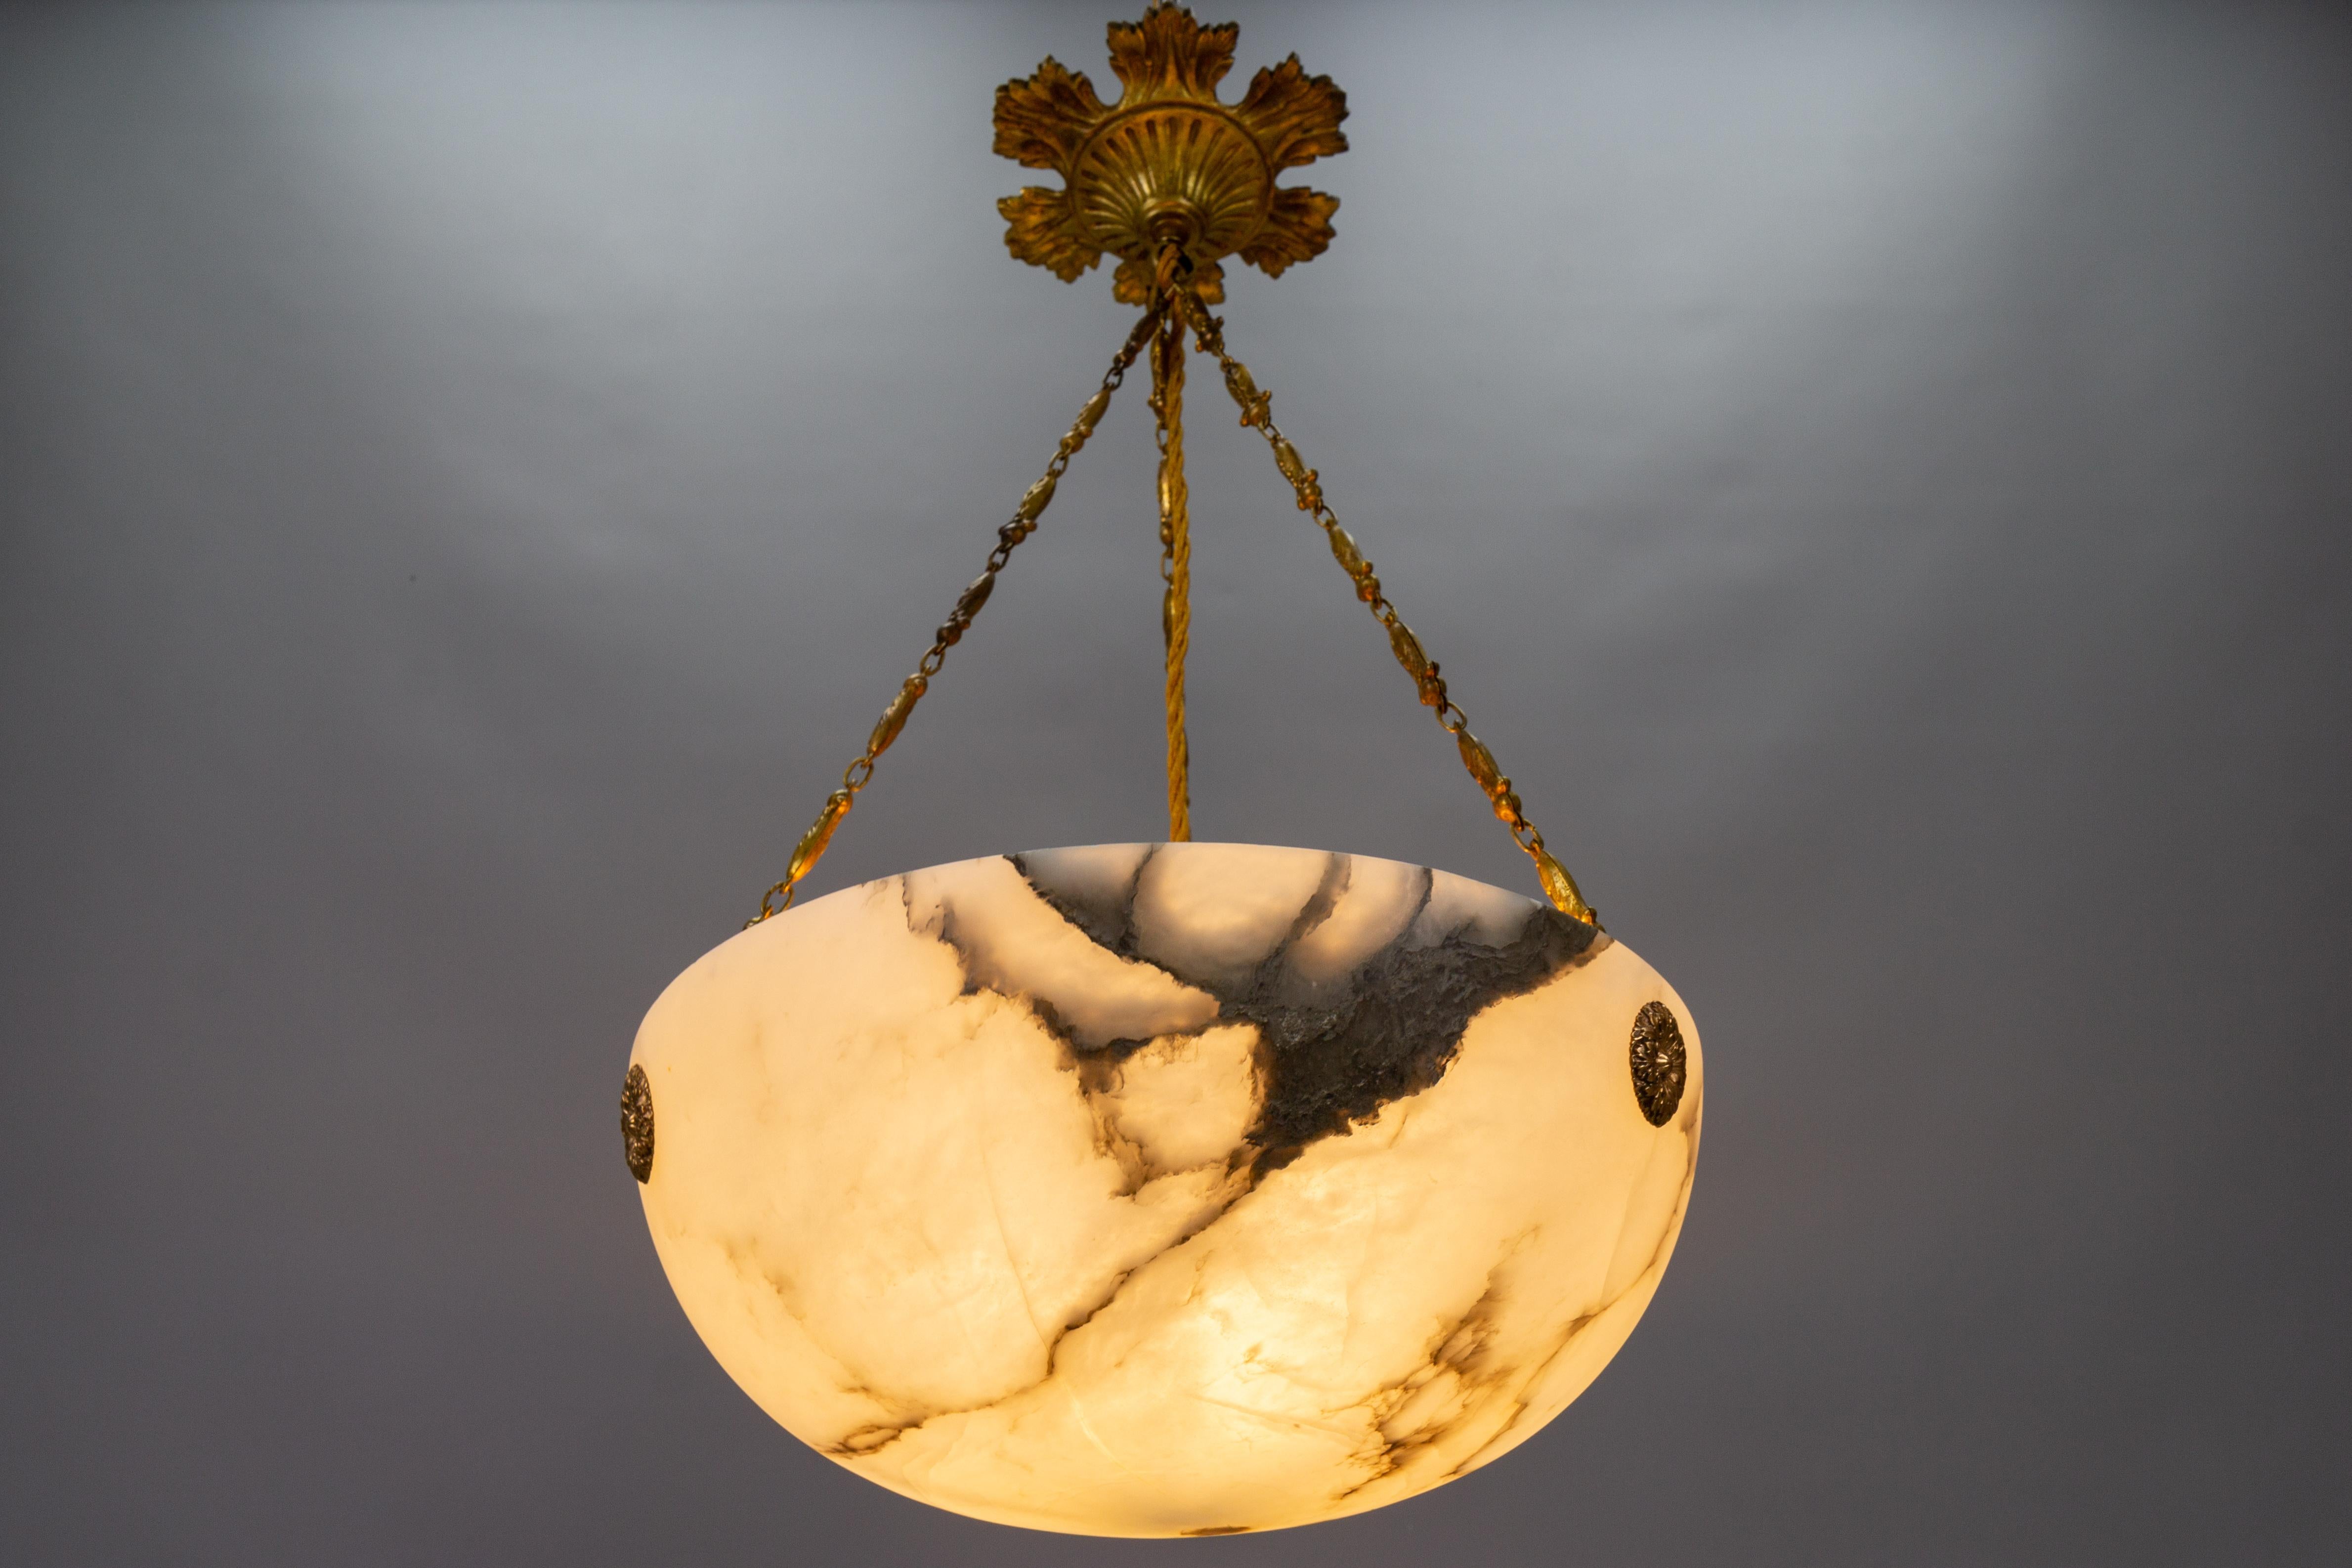 Art Nouveau soft white and black veined alabaster pendant light fixture.
An adorable alabaster pendant ceiling light fixture from circa the 1920s. Beautifully veined and masterfully carved soft white alabaster bowl suspended by three decorative